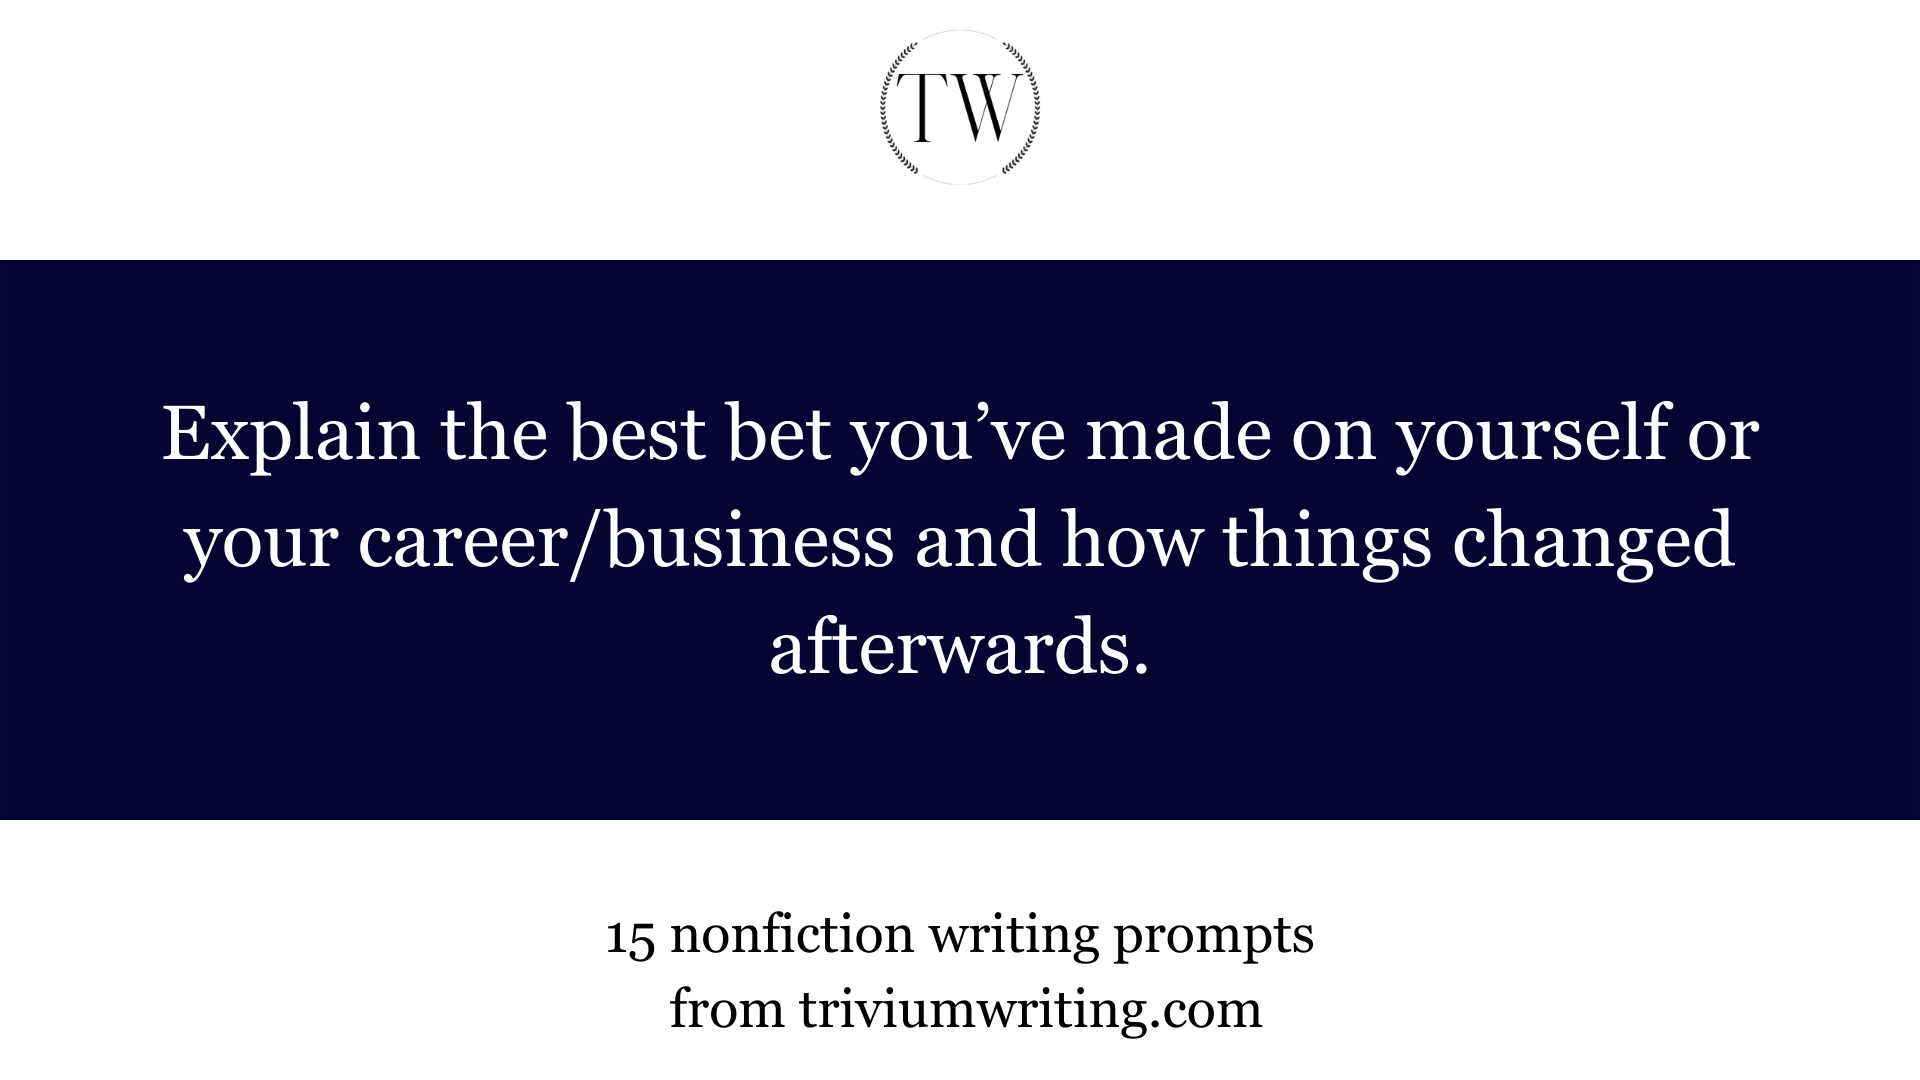 Explain the best bet you’ve made on yourself or your career/business and how things changed afterwards